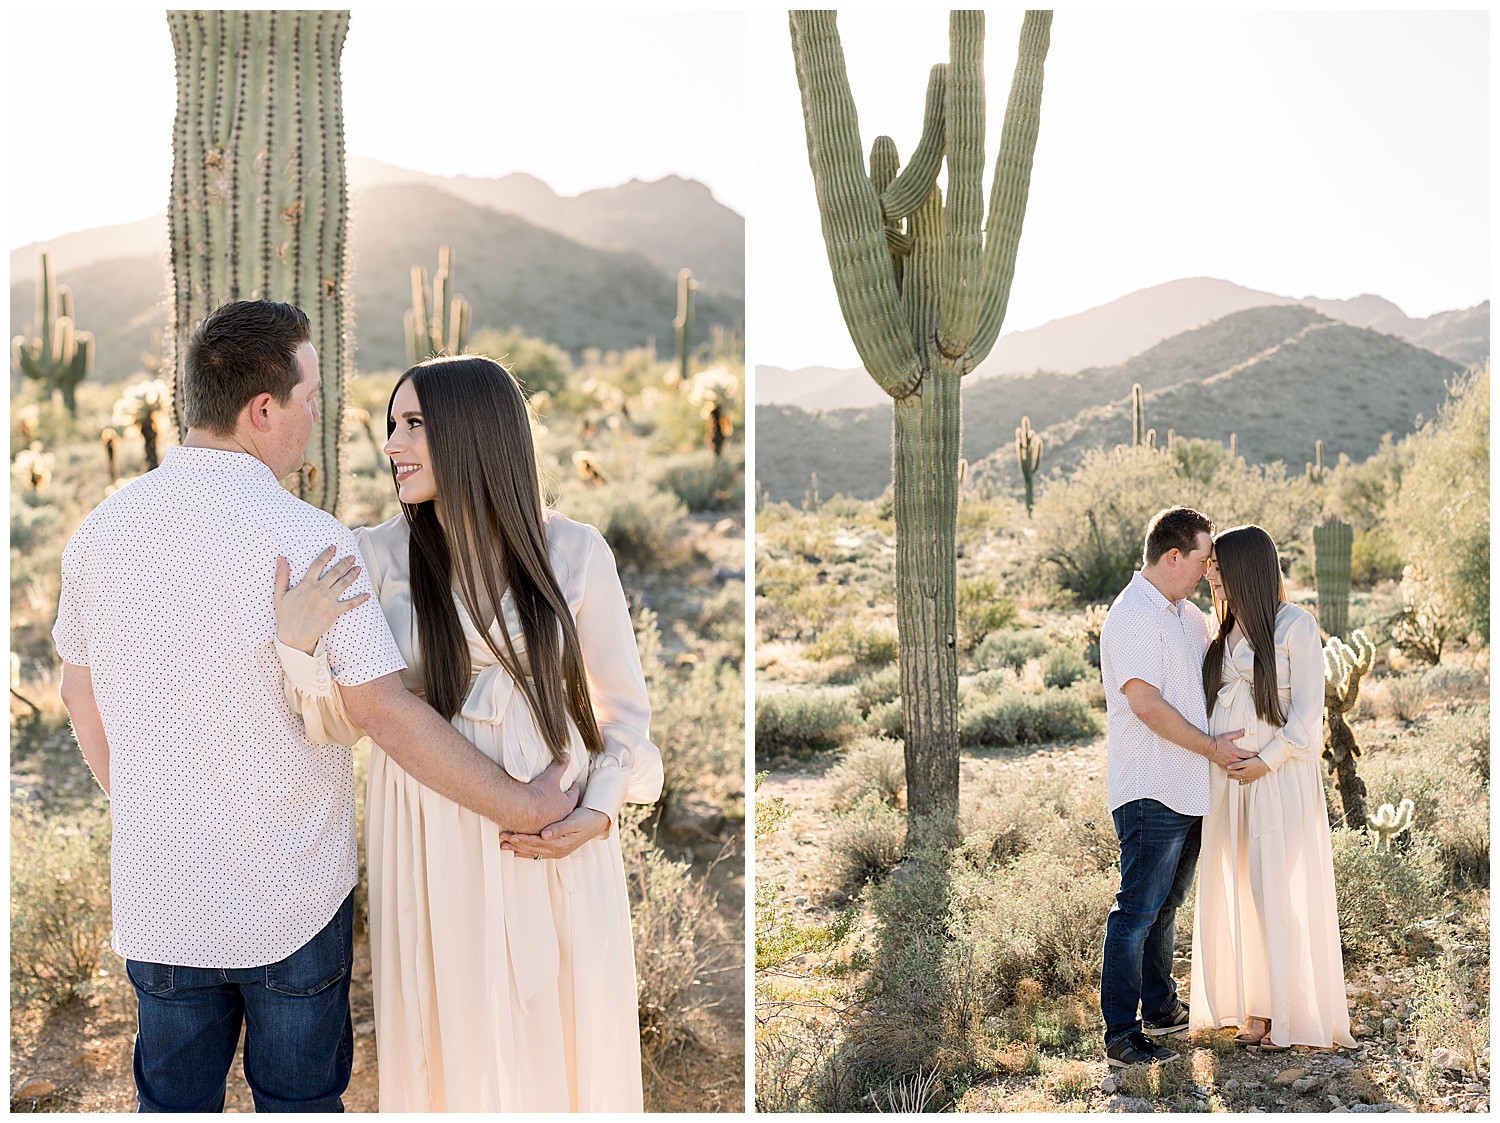 Arizona Desert Maternity Session in the glowing golden hour, ivory gown,